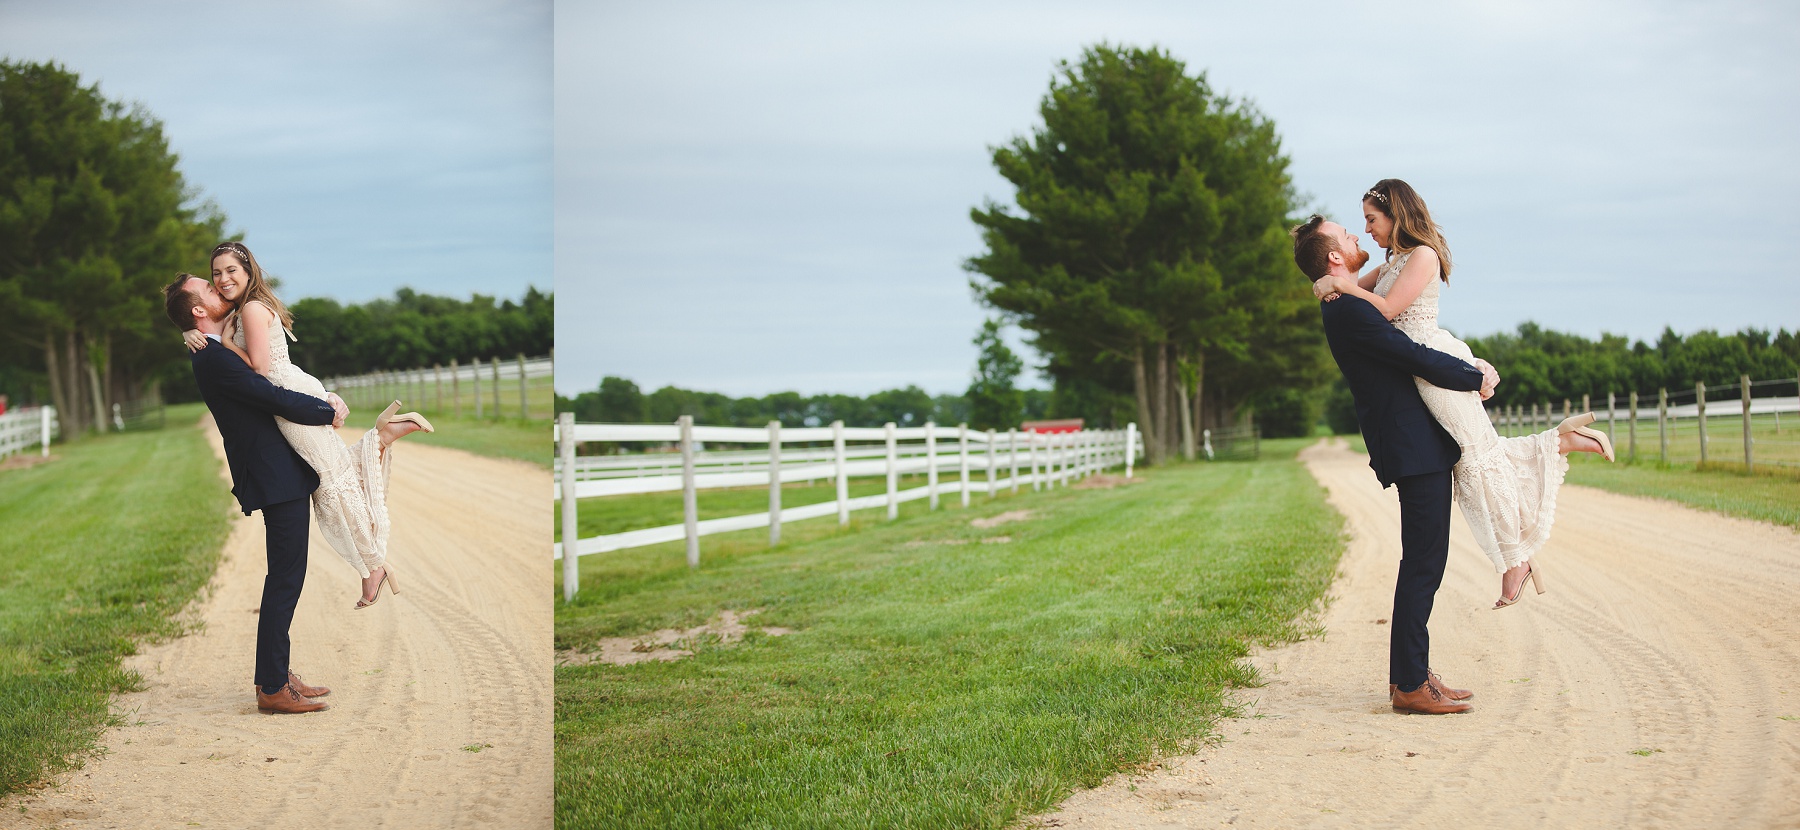  Family Farm Wedding in South Jersey Photography - Rustic Barn NJ - Millville, Vineland, Pittsgrove, Cape May, Ocean City 